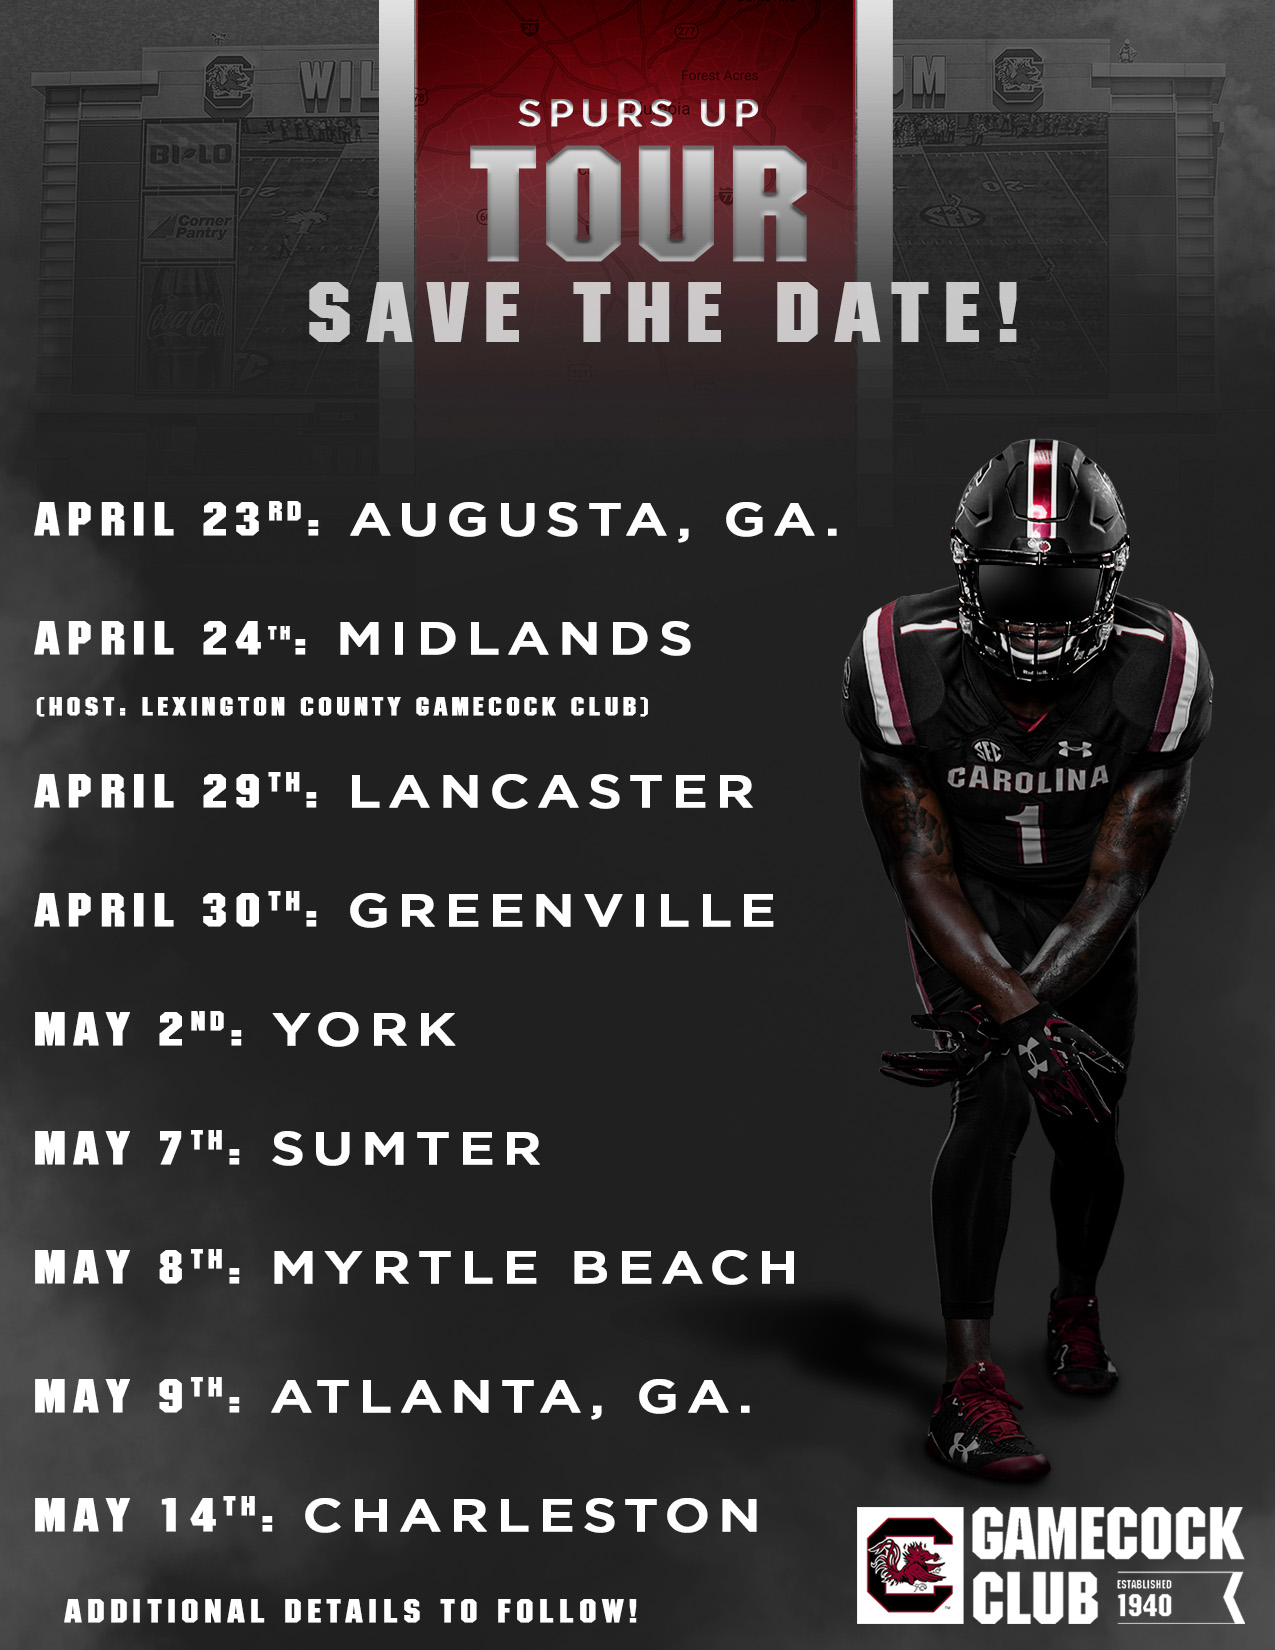 Save the Date! Spurs Up Tour Dates and Locations Announced